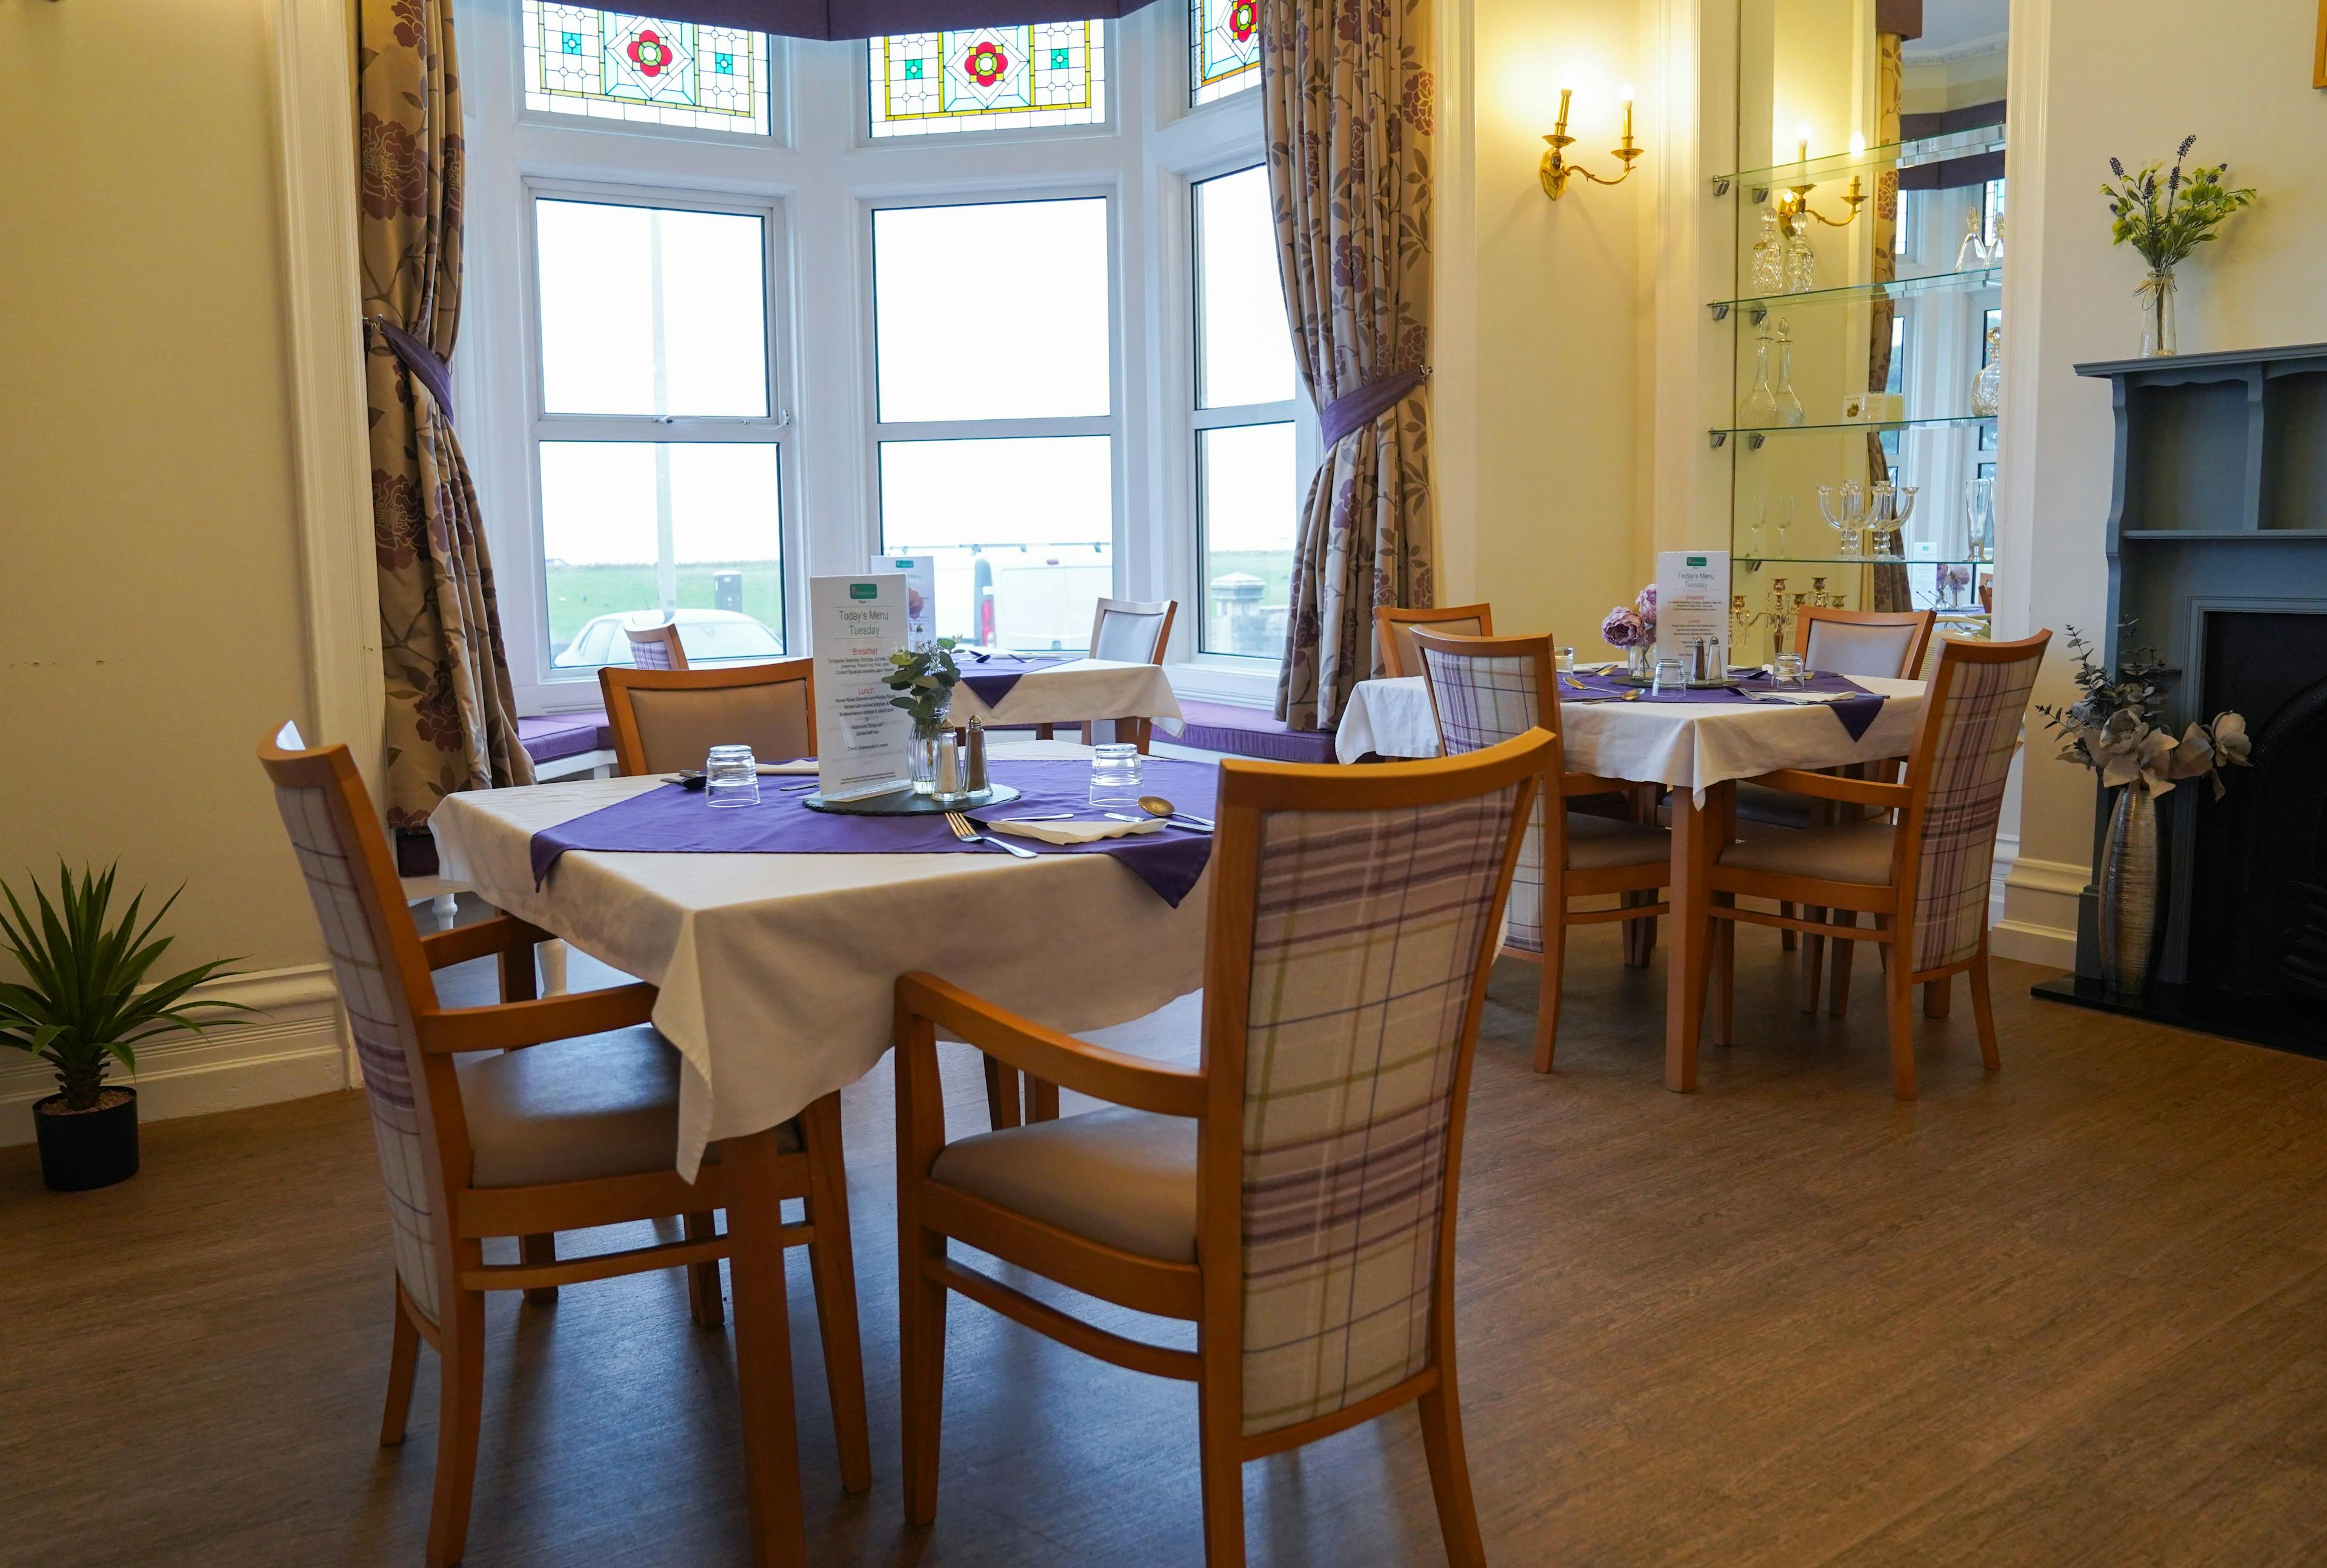 Dining Room at Beach Lawns Care Home in Somerset, South West England